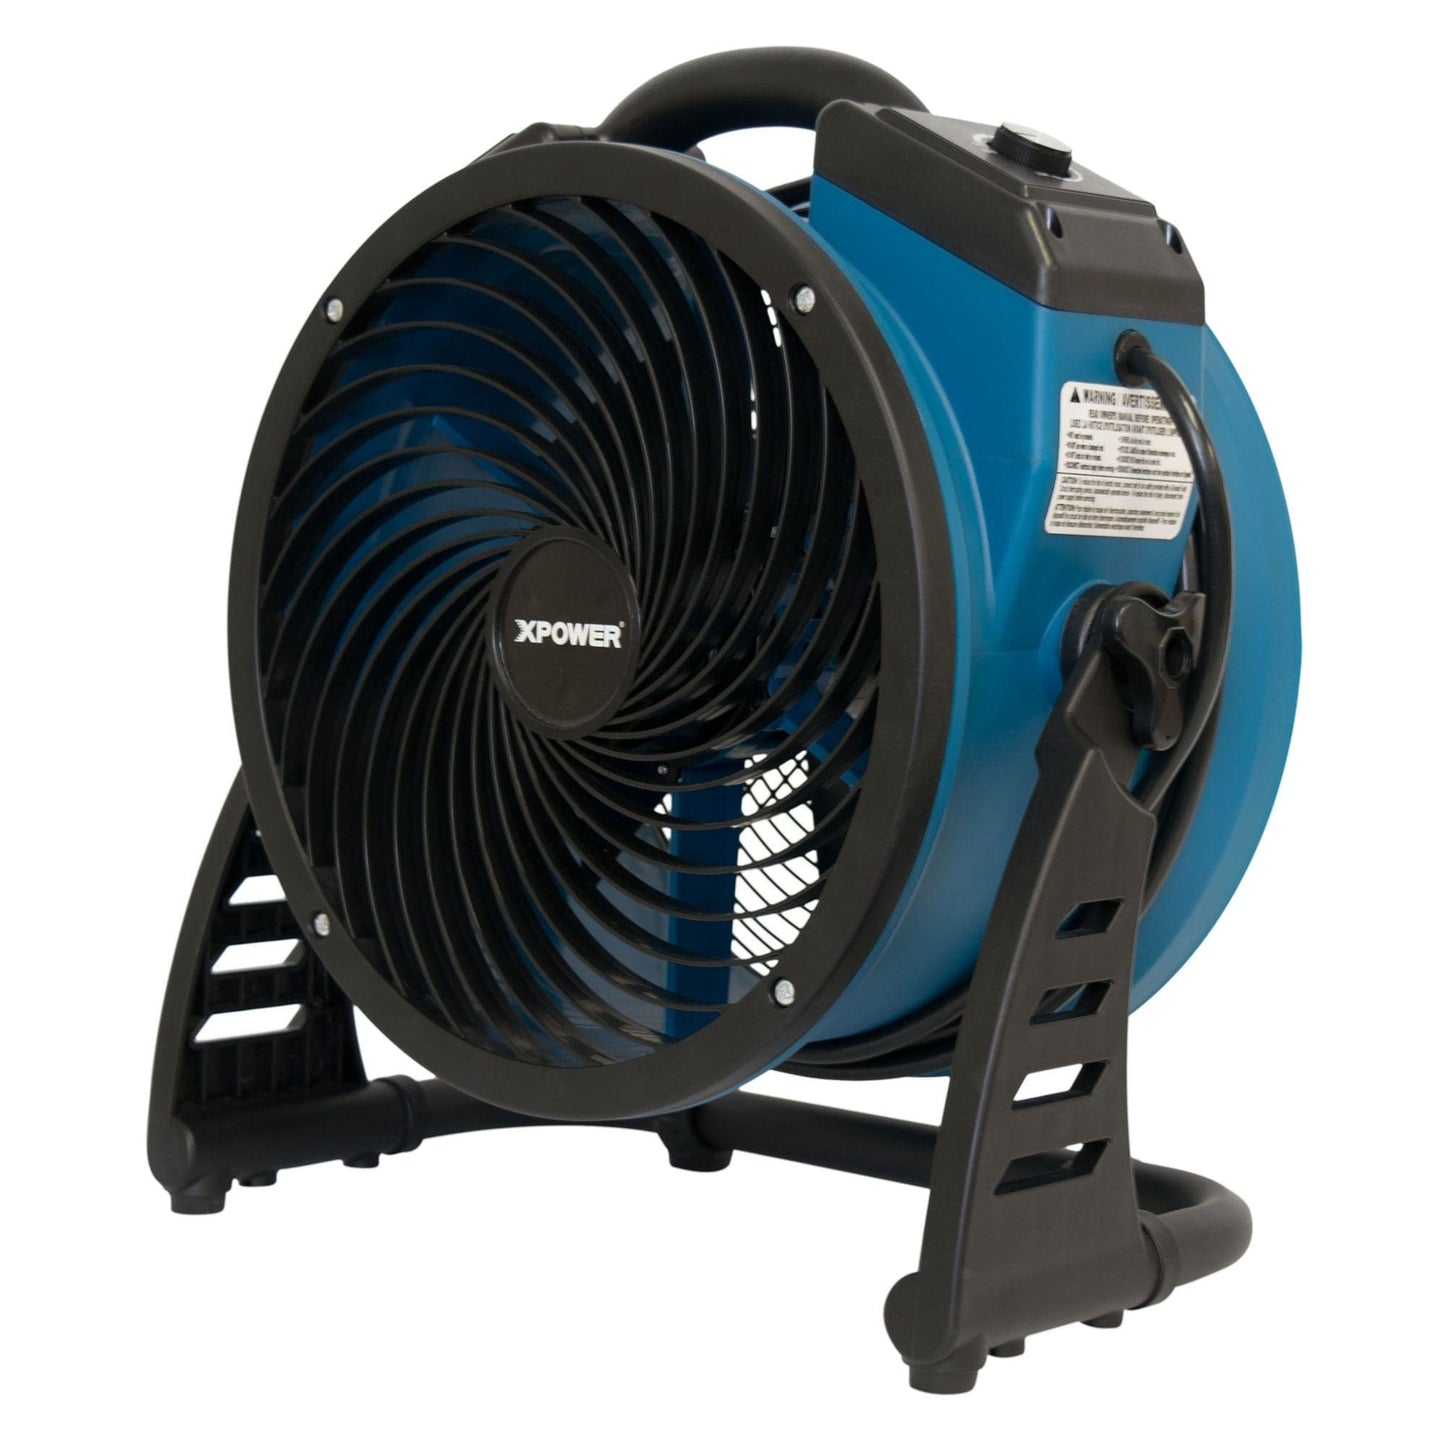 XPOWER P-26AR 1300 CFM 4 Speed Industrial Axial Air Mover, Blower, Fan with Built-in Power Outlets